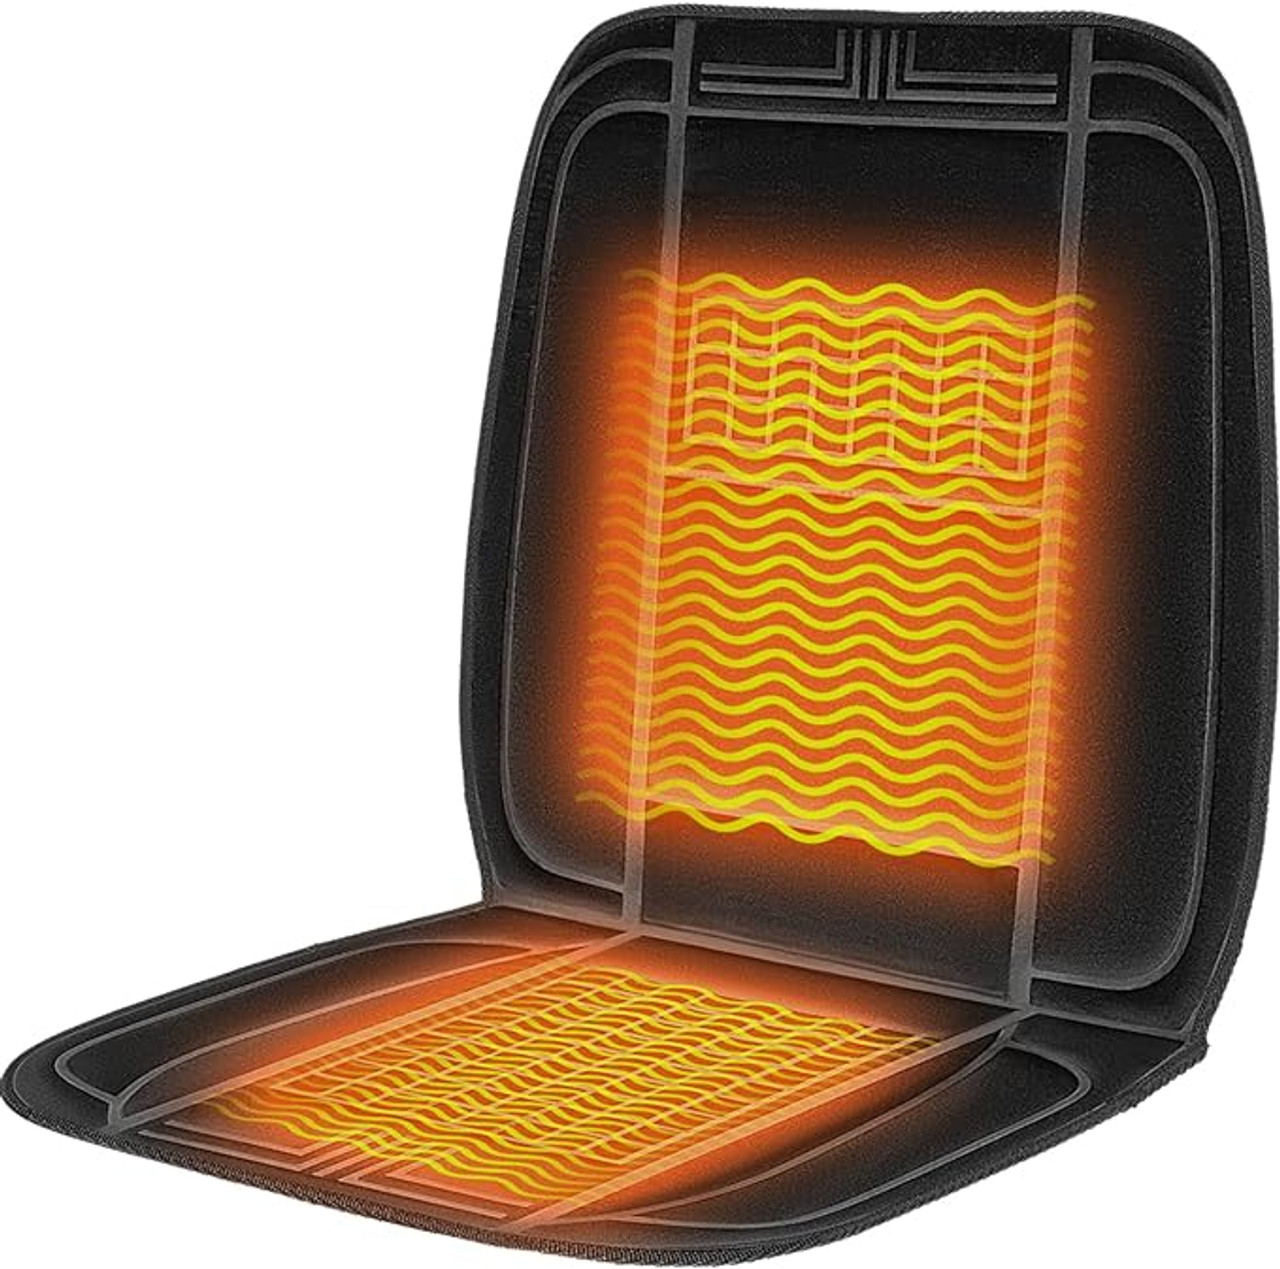 Seat Cushion with Heat:Winter Heated Seat Cover with Fast Heating